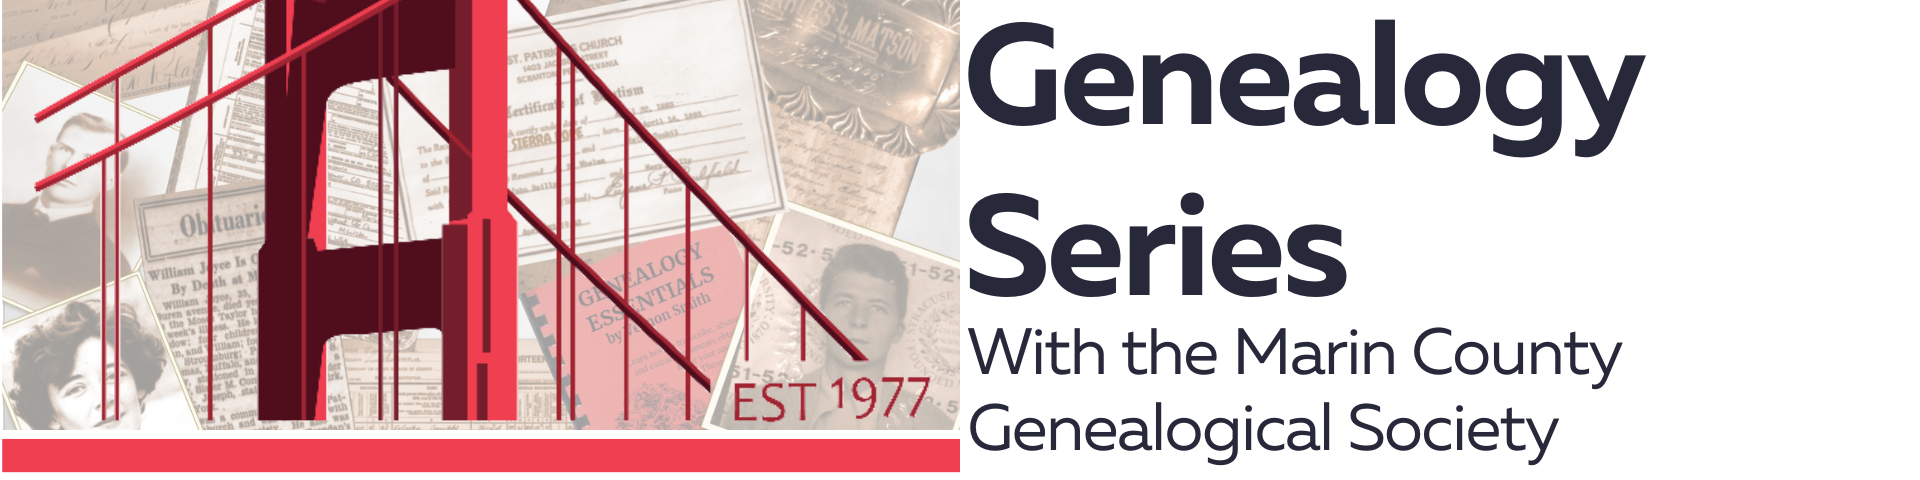 Genealogy Series: DNA Testing: Ancestry.com @ Downtown Library